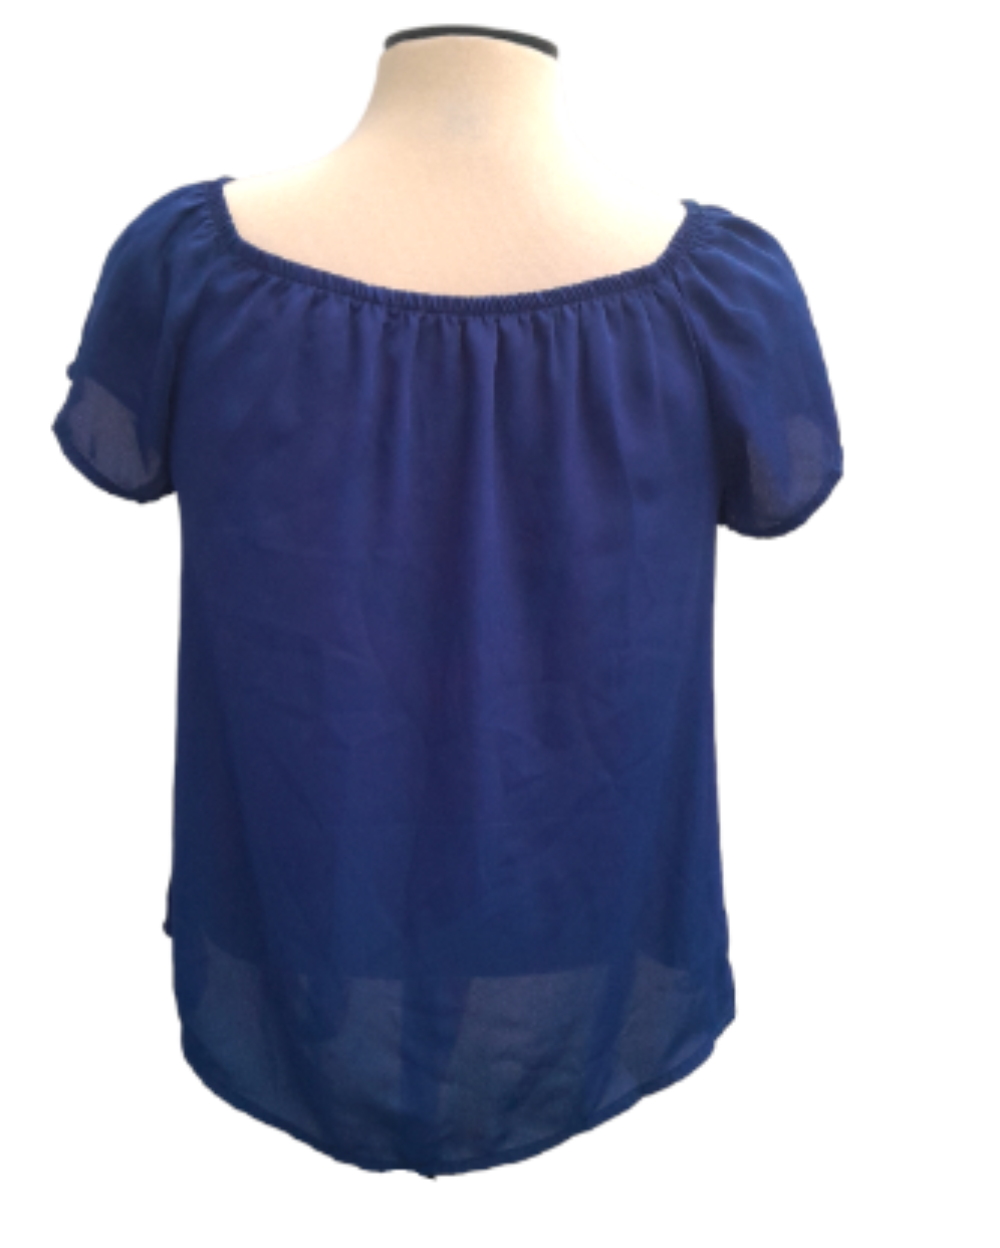 Blusas Casuales Stefany